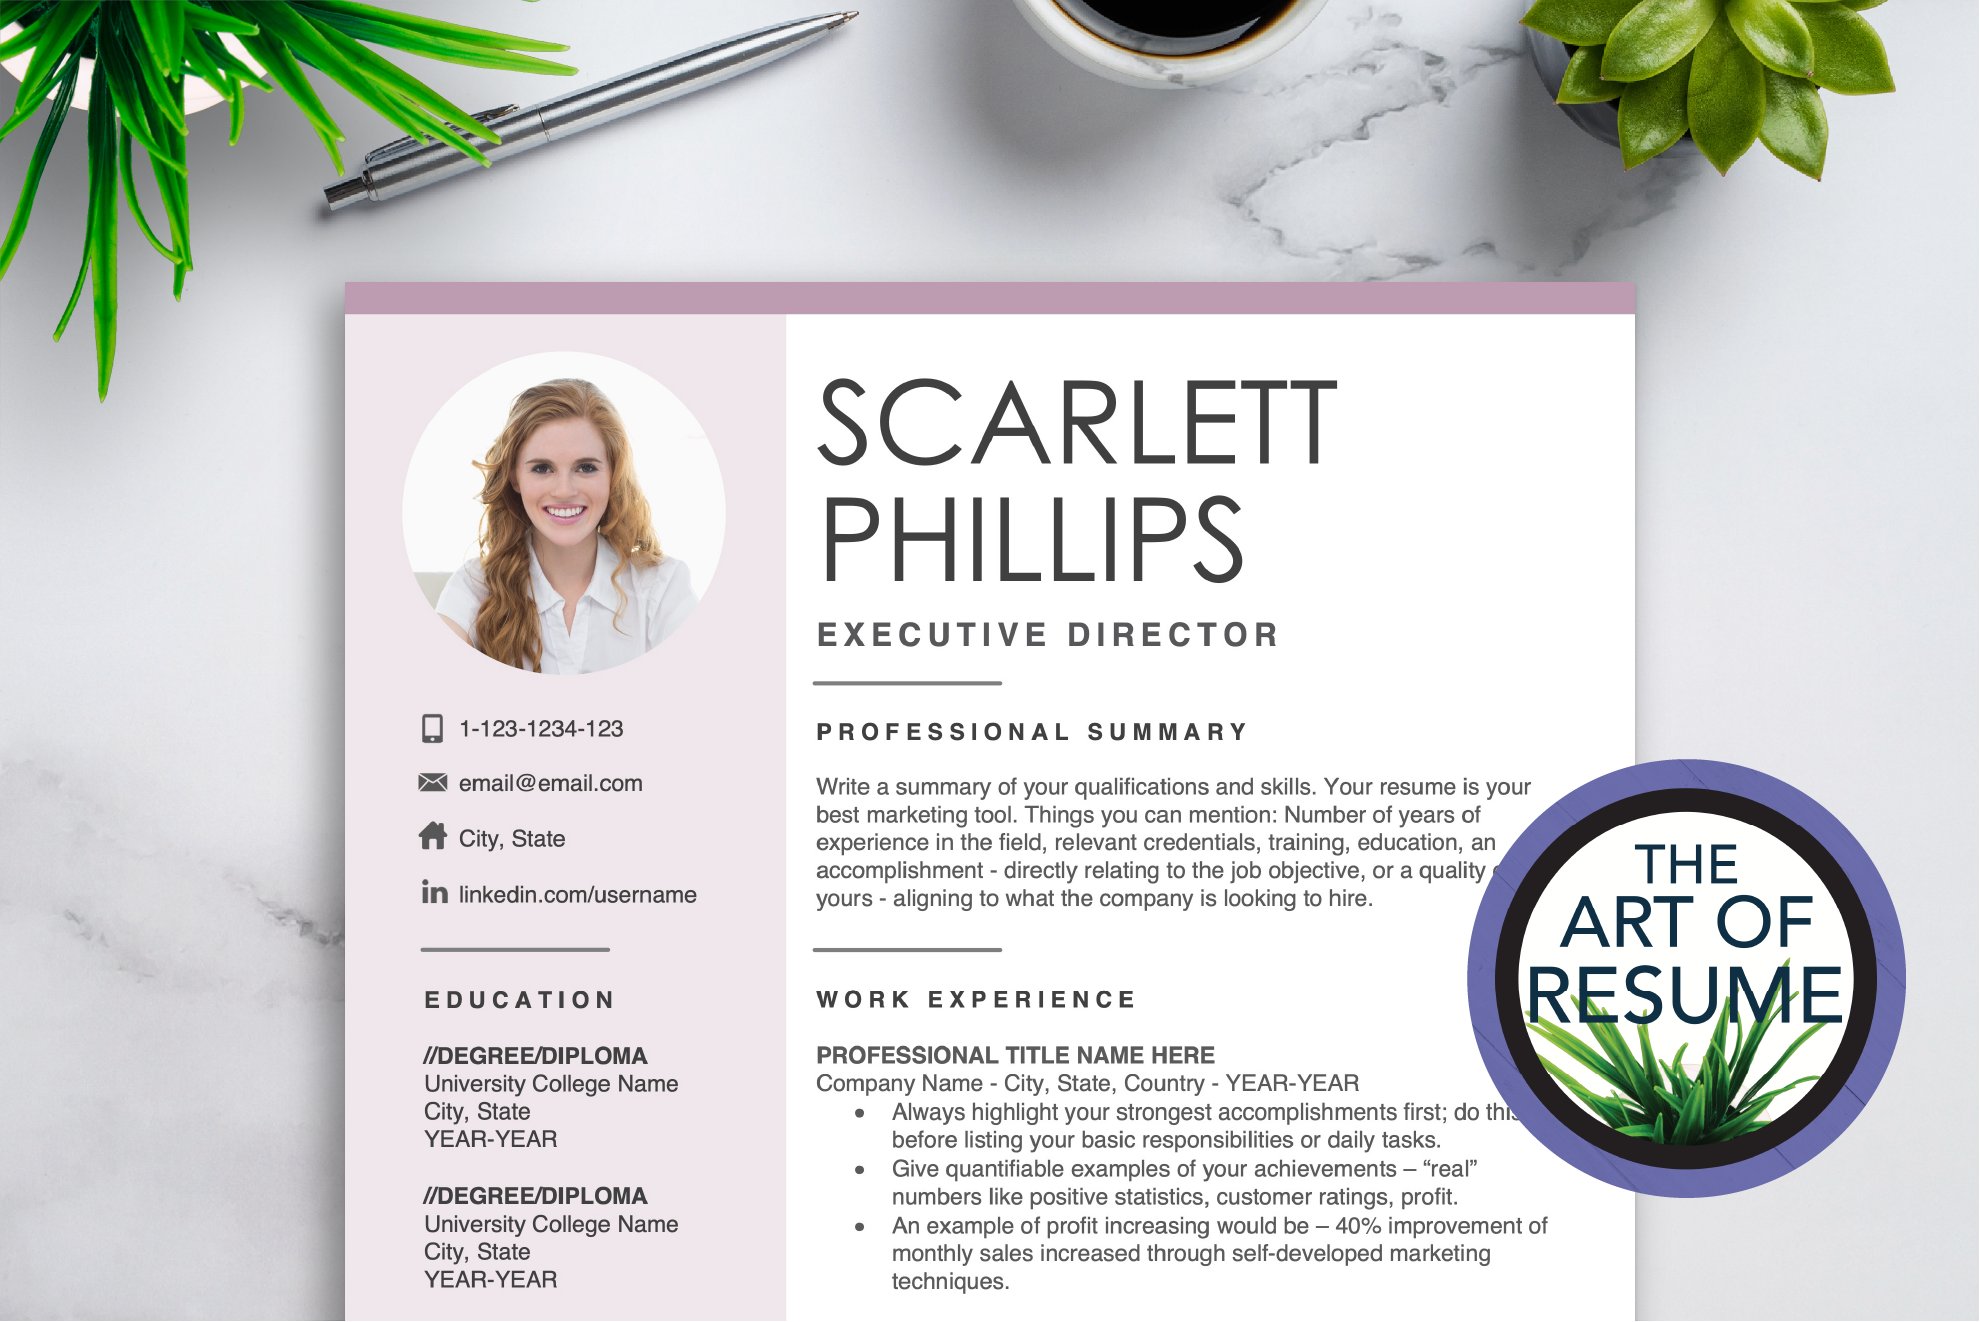 Creative Resume with Photo Picture cover image.